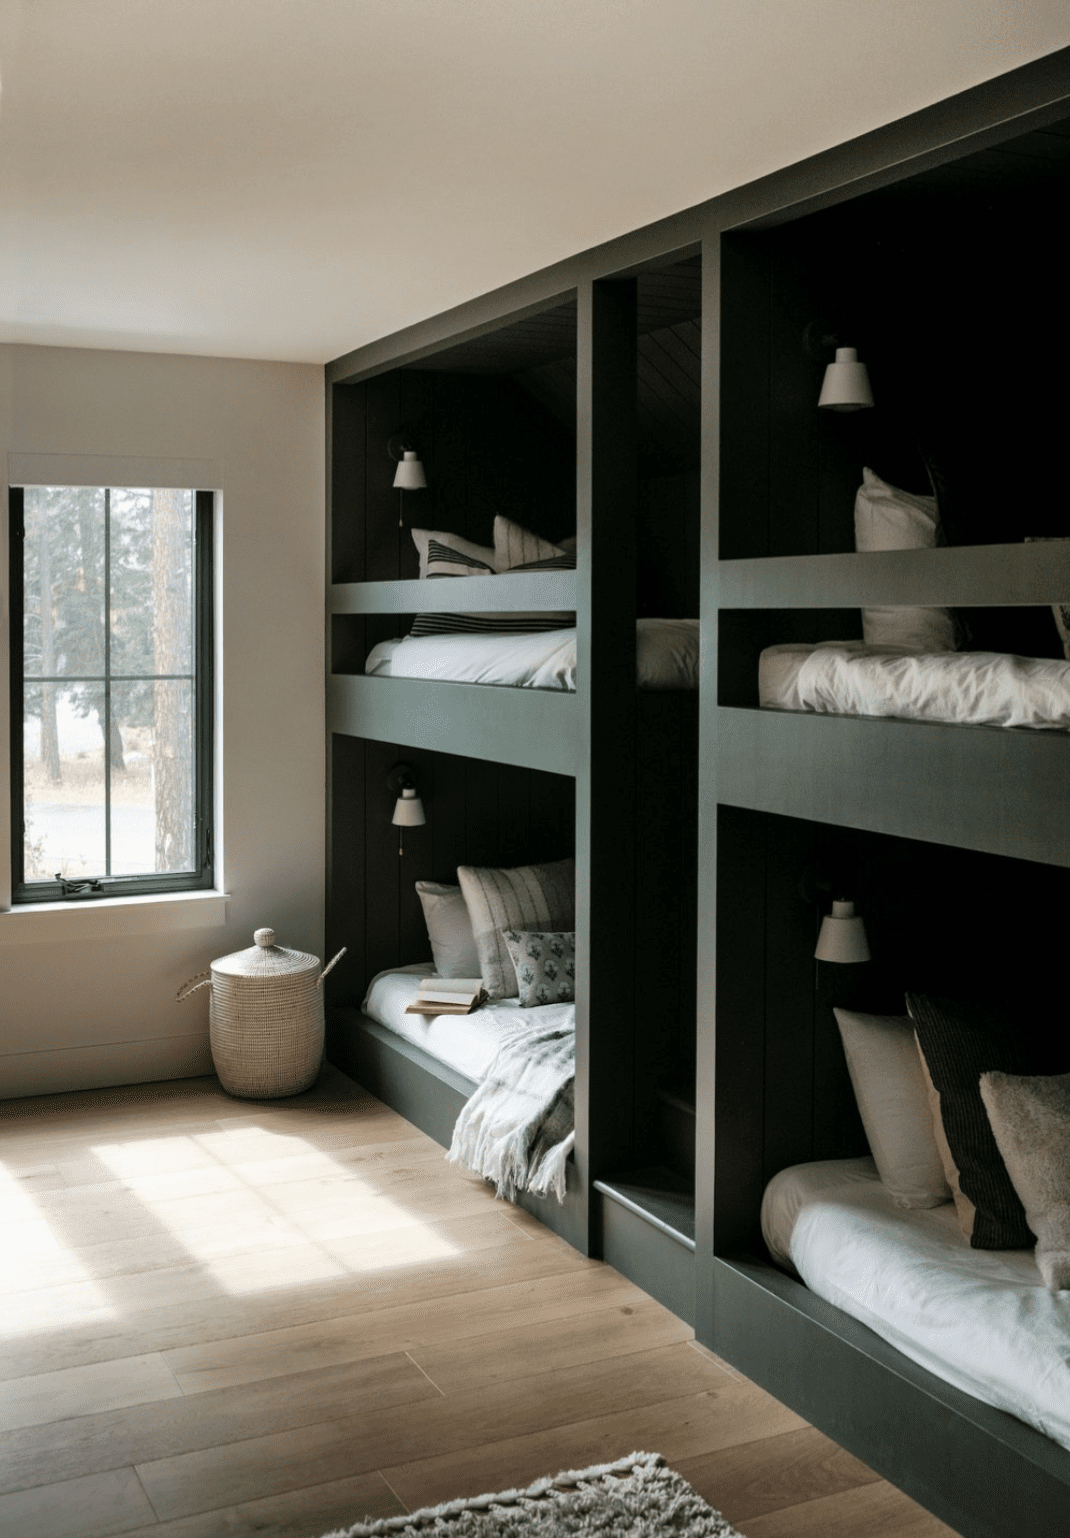 Green bunk beds in a white bedroom